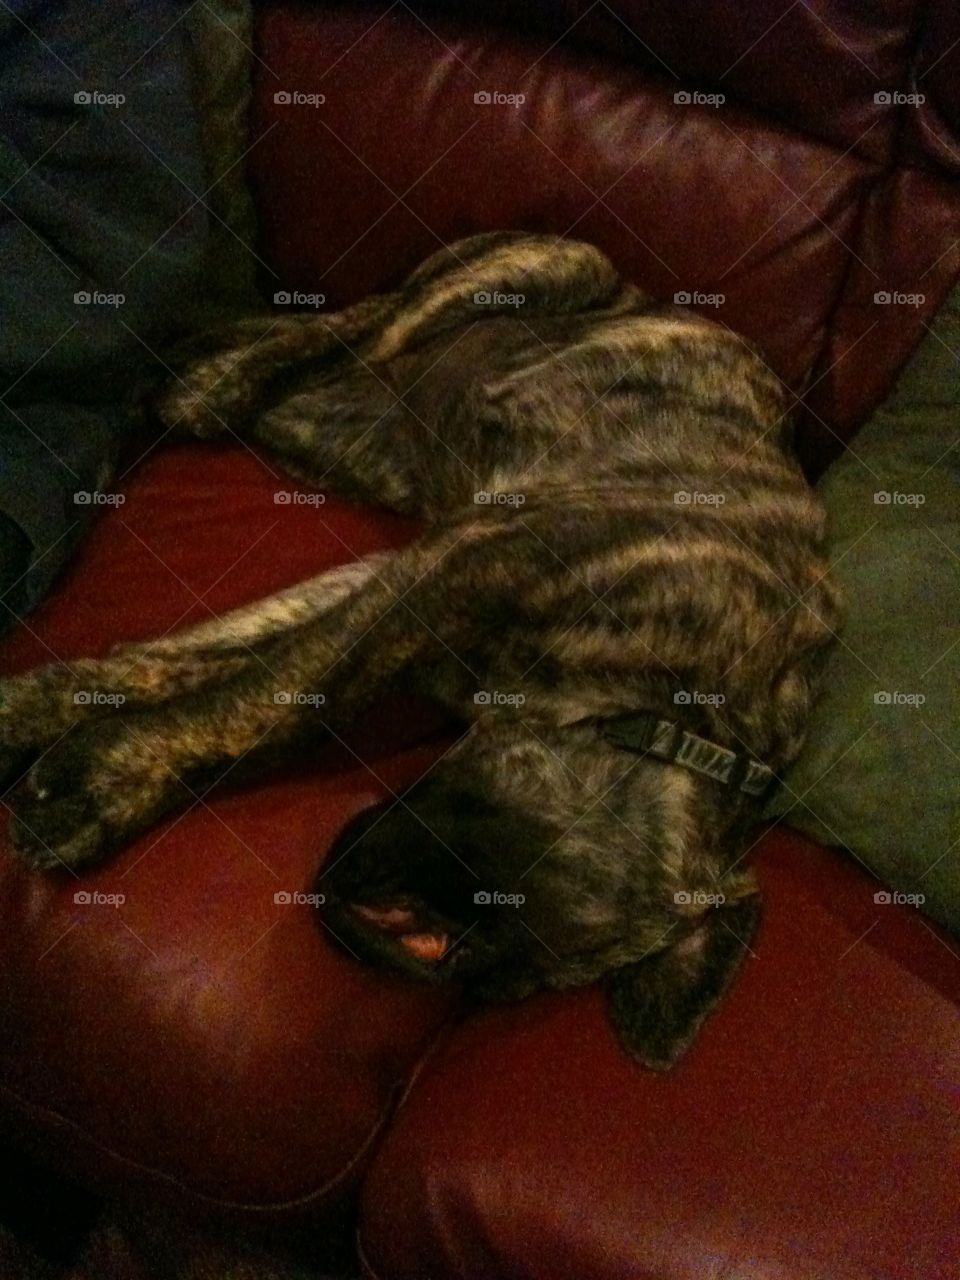 Large dog falls asleep on couch